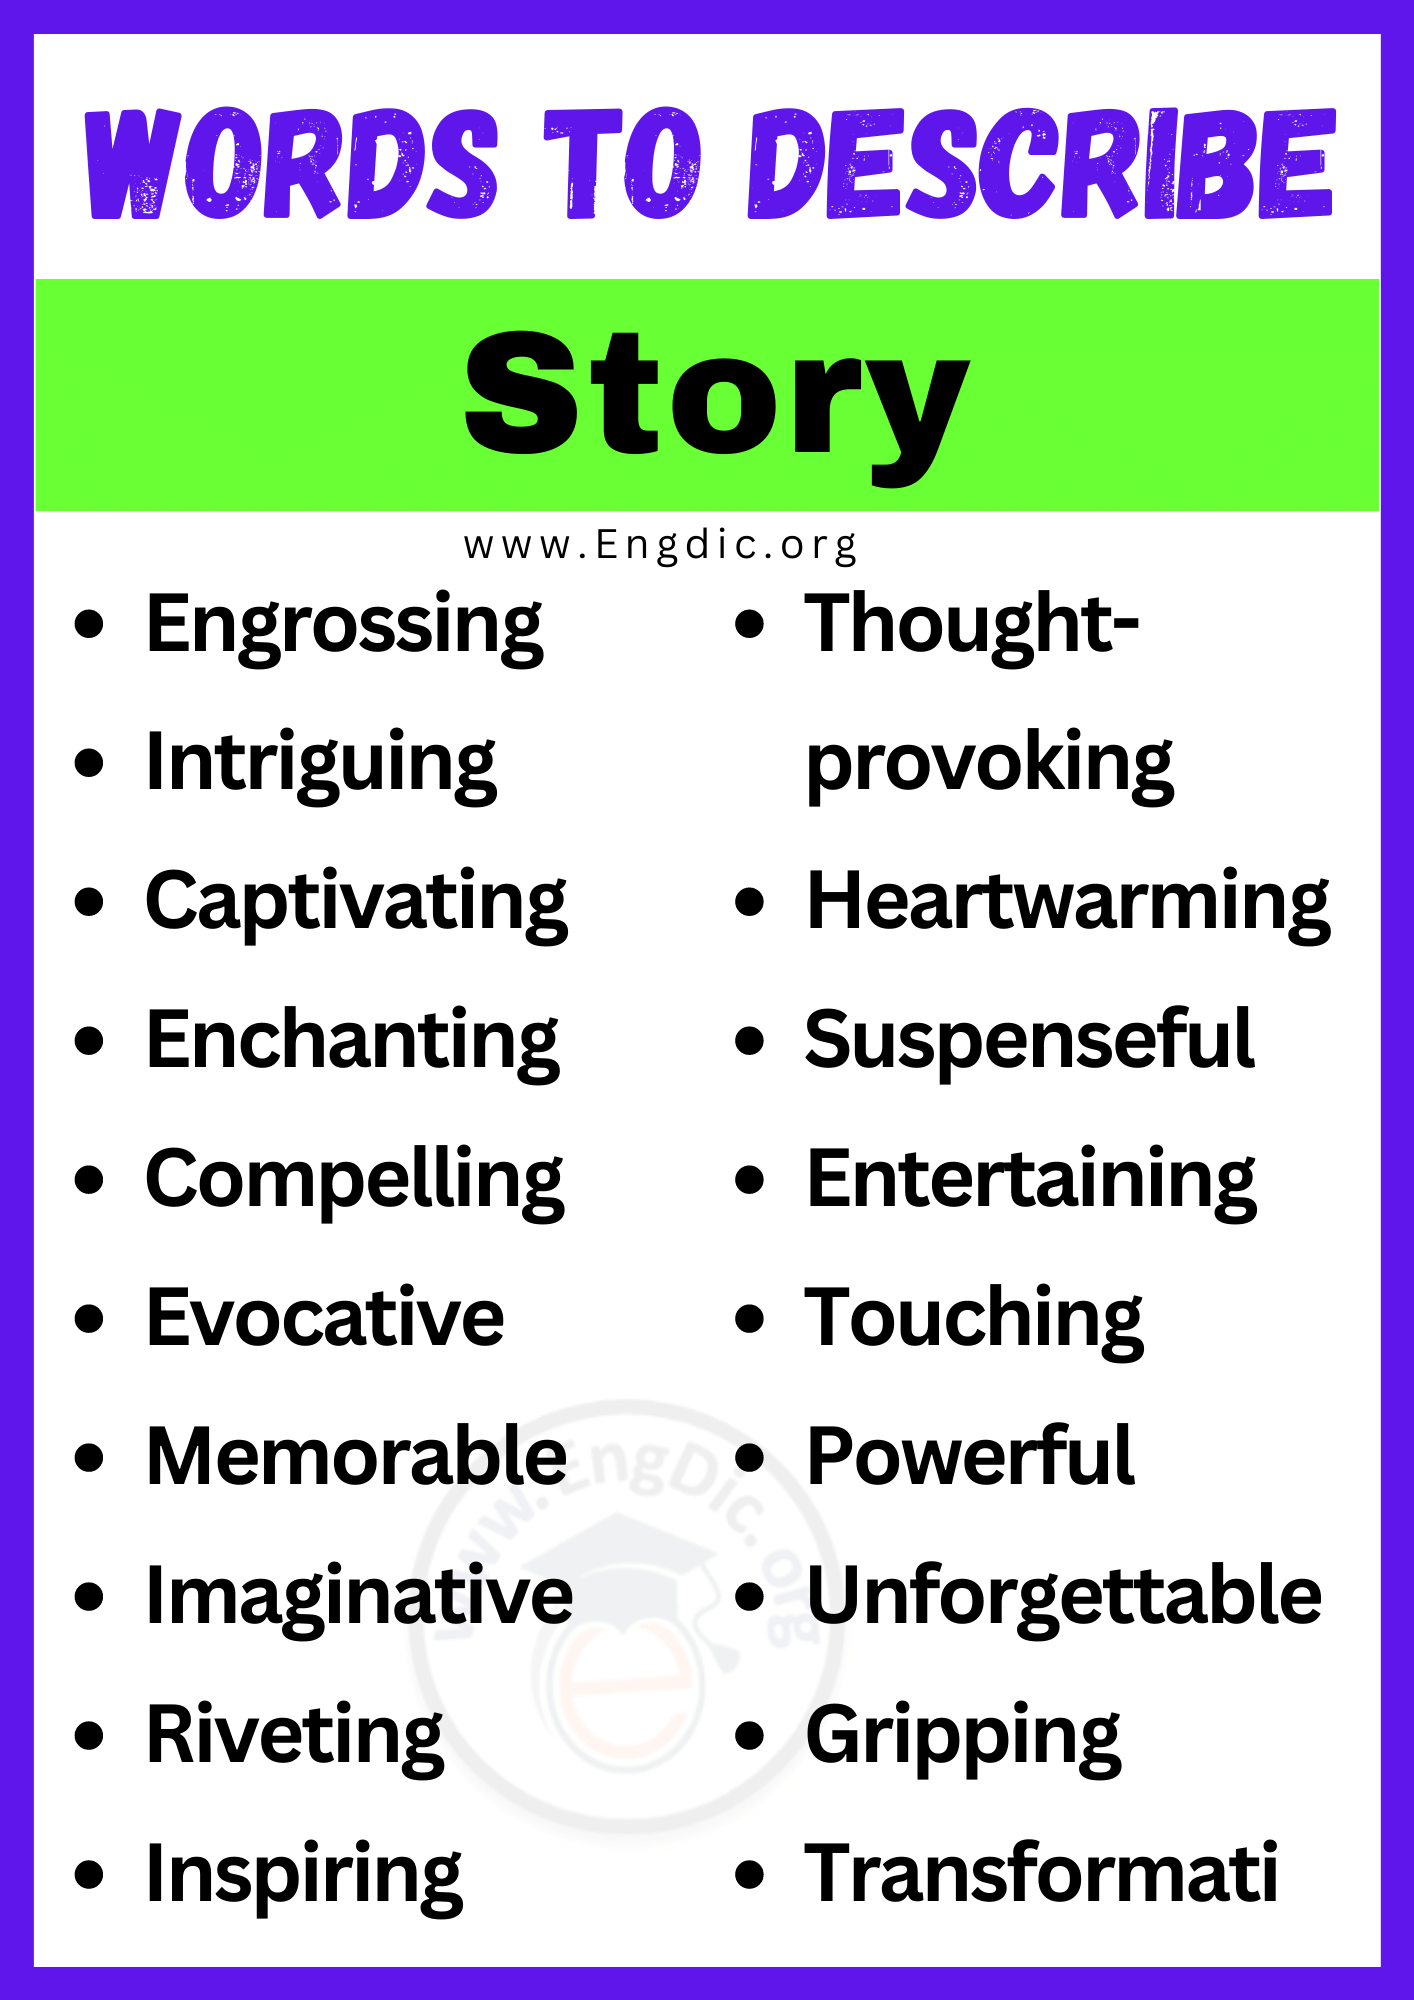 Words to Describe Story